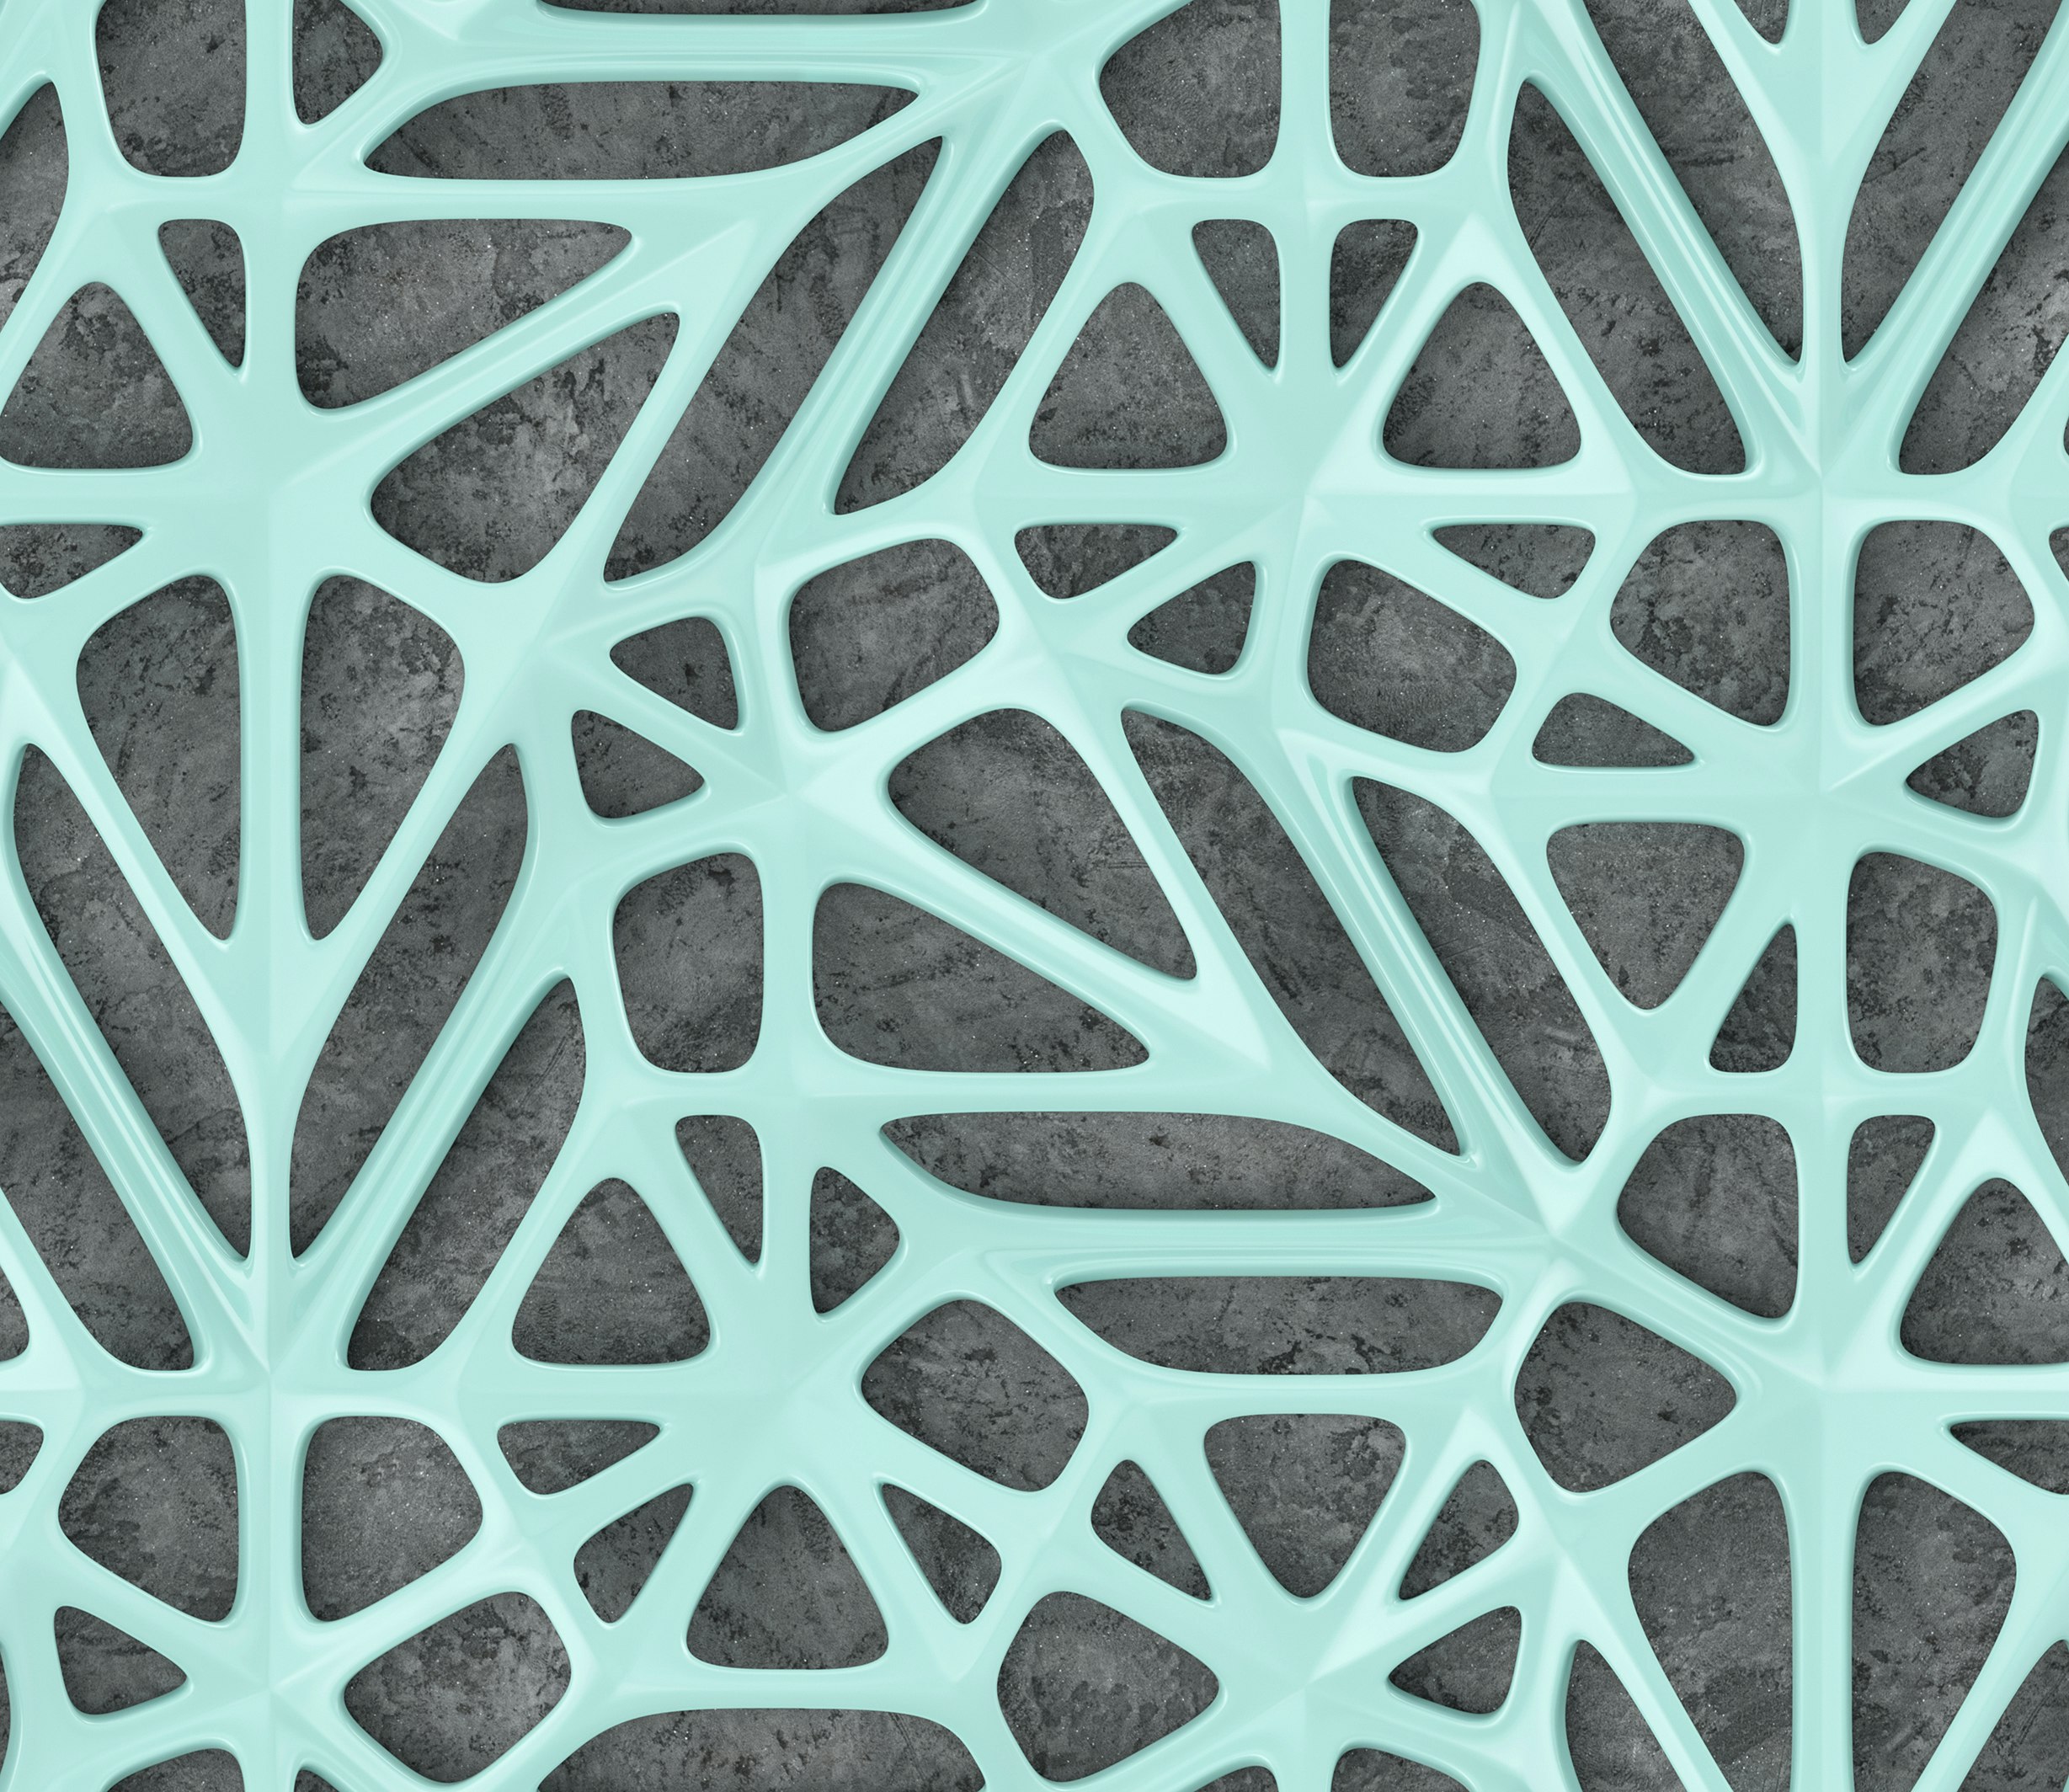 3d light green lattice tiles on gray concrete background. High quality seamless realistic pattern.